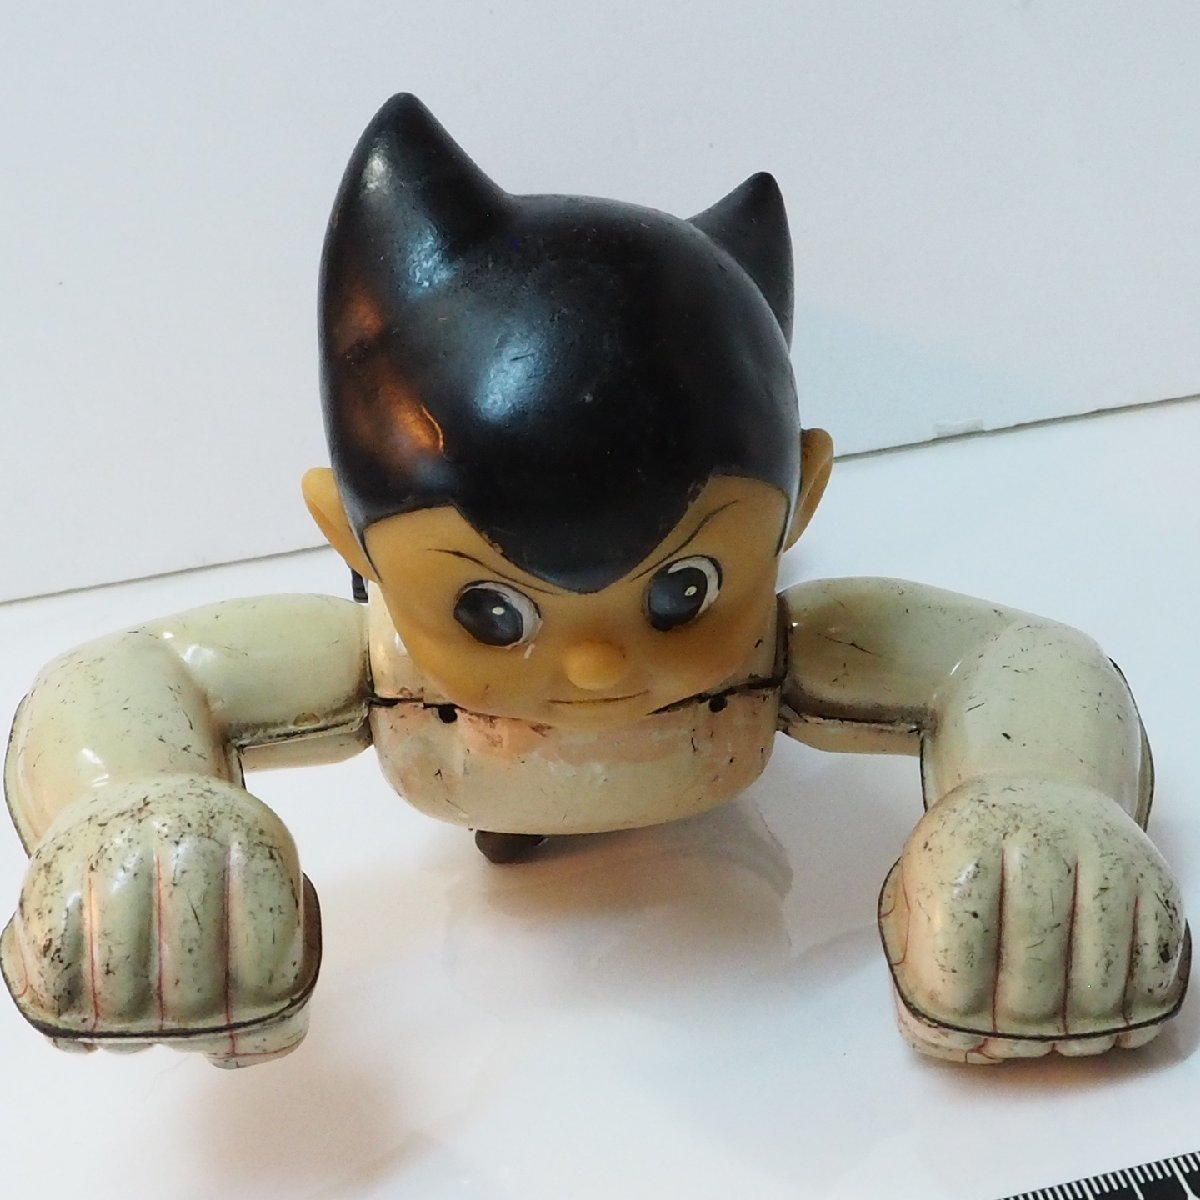  old Bandai [ departure fire Astro Boy friction & departure fire parts missing .] that time thing tin plate toy TIN TOY hand .. insect #. fee shop B.C.BANDAI[ Junk ]0640